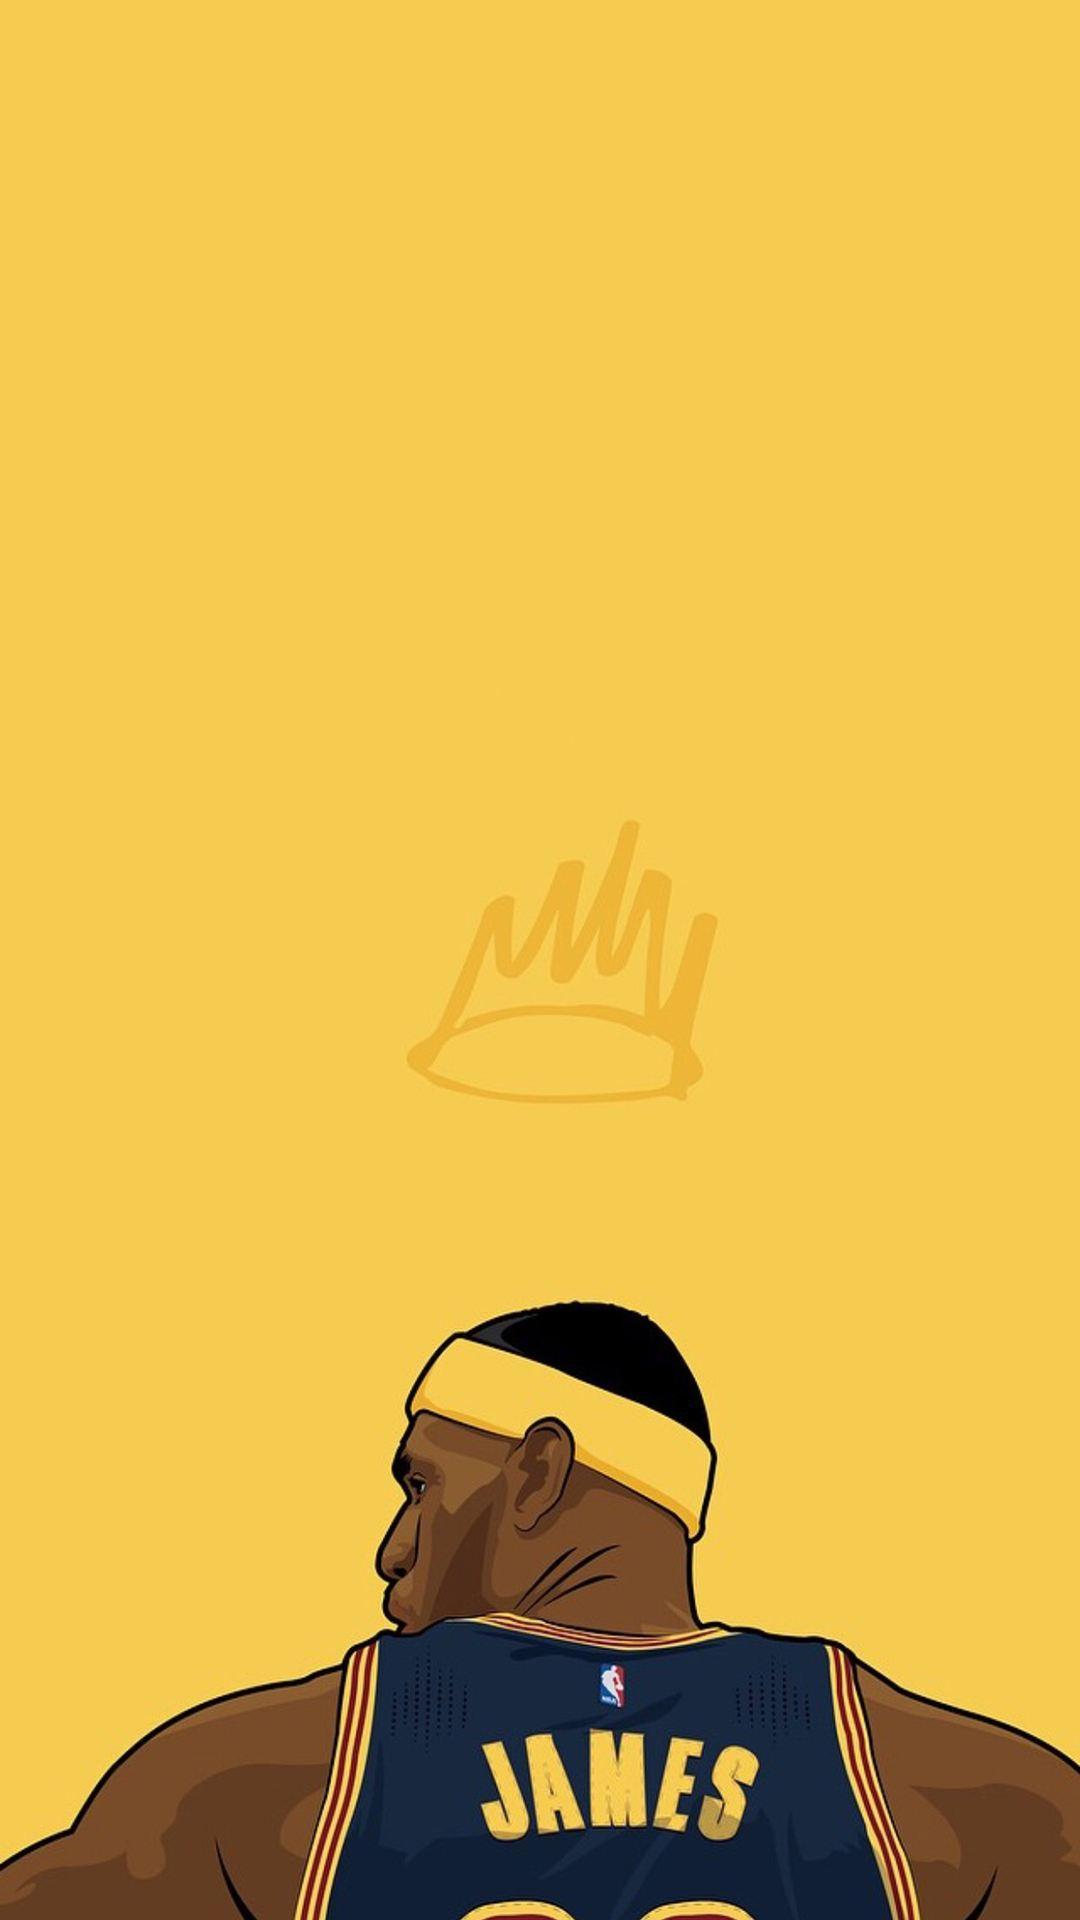 NBA Wallpaper James for Android